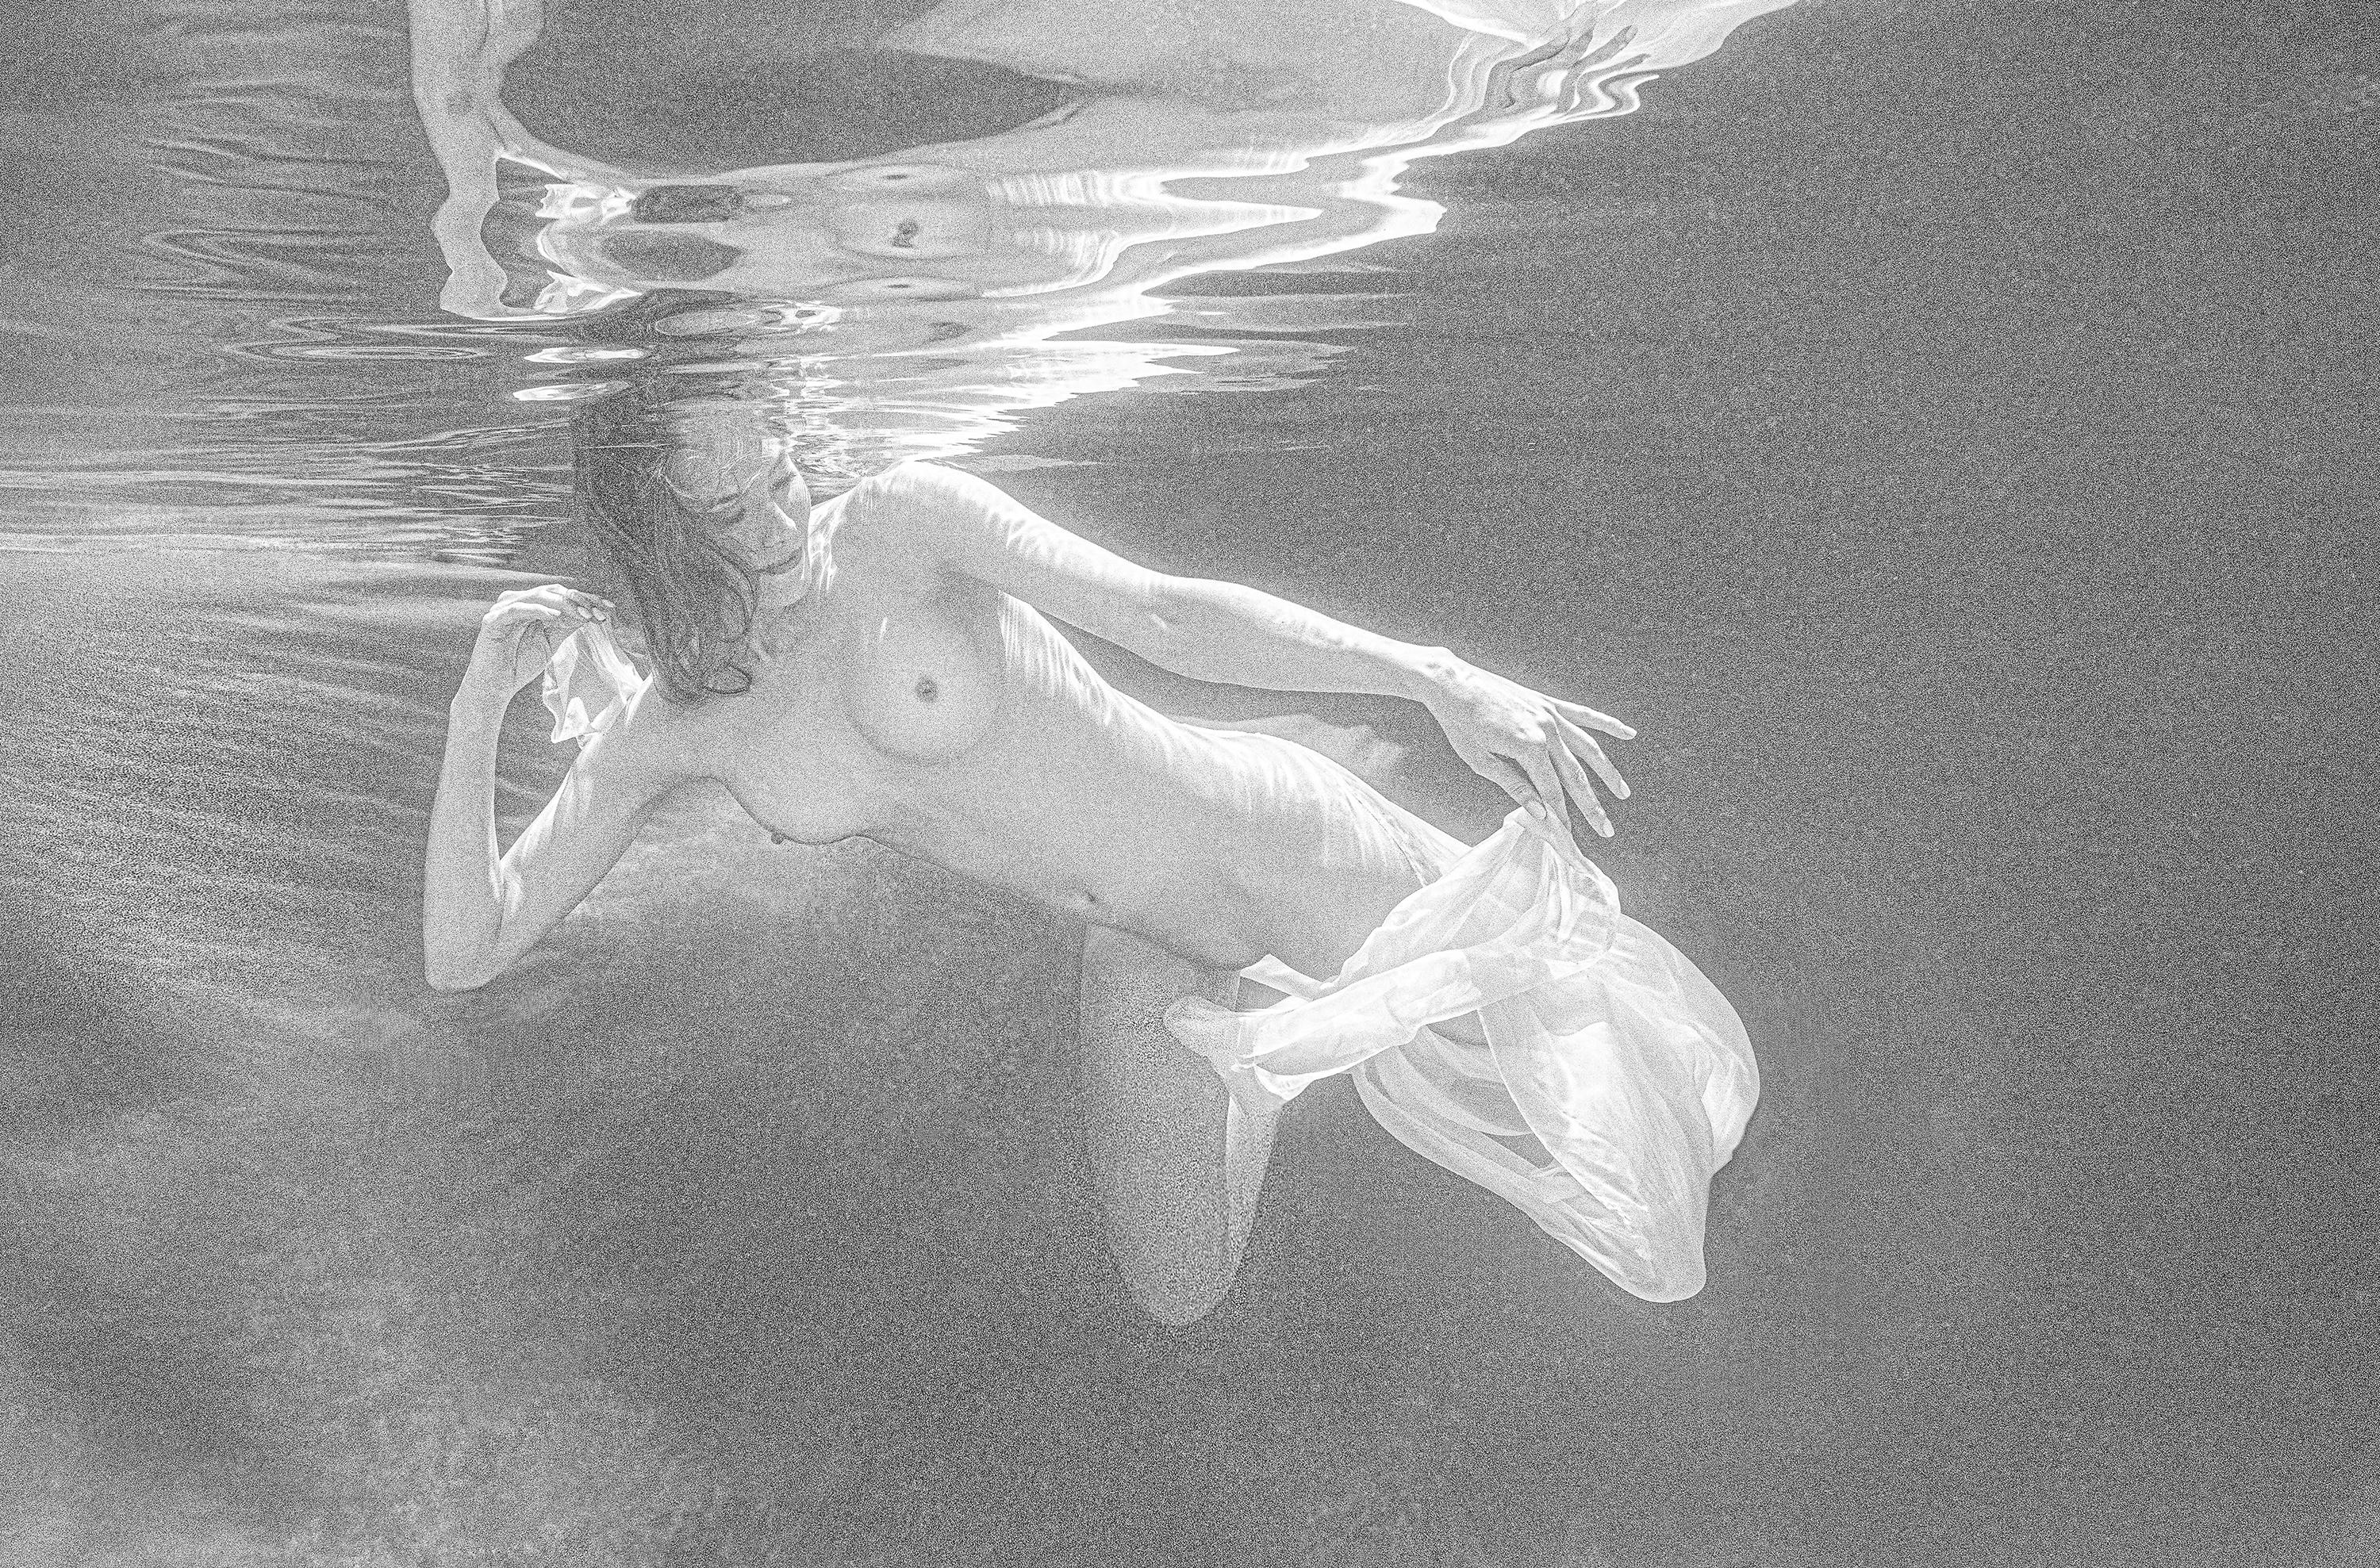 Alex Sher Nude Photograph - Water Sketch - underwater black & white nude photograph - archival pigment 23x35